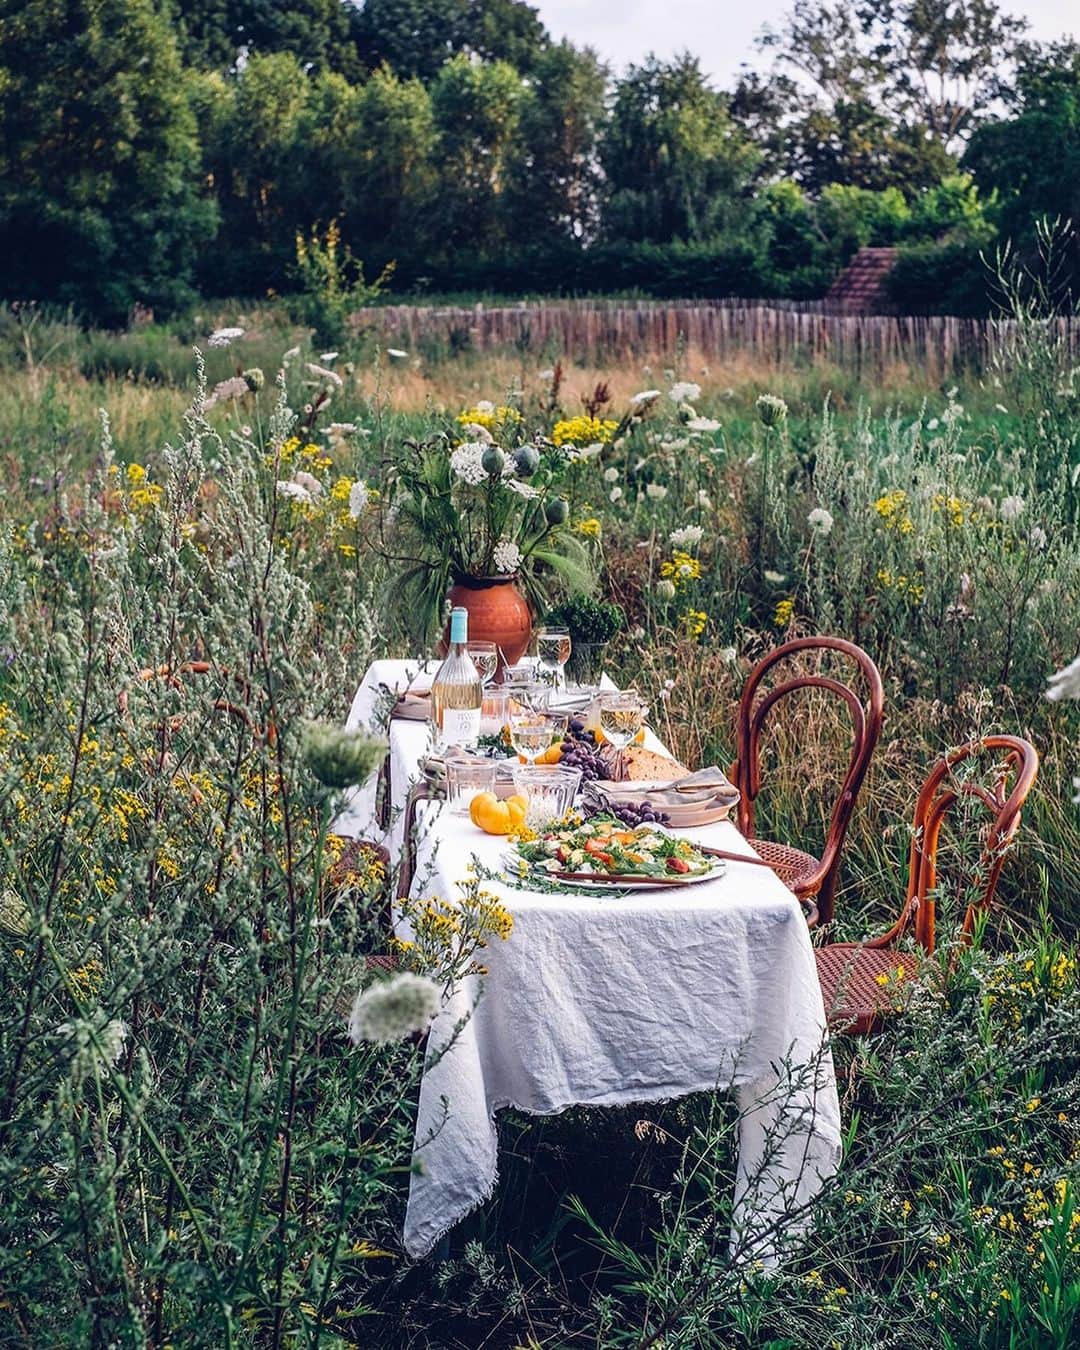 Our Food Storiesのインスタグラム：「Holding onto the last days of summer before we fully embrace autumn, so we try to enjoy as much outdoor dinners as possible 🤗🌿 Get the recipe for our favorite summer salad on the blog, link is in profile. #ourfoodstories_countryside  ____ #countrysidelife #countrysideliving #countrysidewalks #gatheringslikethese #gatherings #tabledecor #tabledecoration #tablescapes #tablestyling #onthetable #tablesettings #tischdeko #landlust #tischdekoration #visitbrandenburg #foodstylist #foodphotographer」